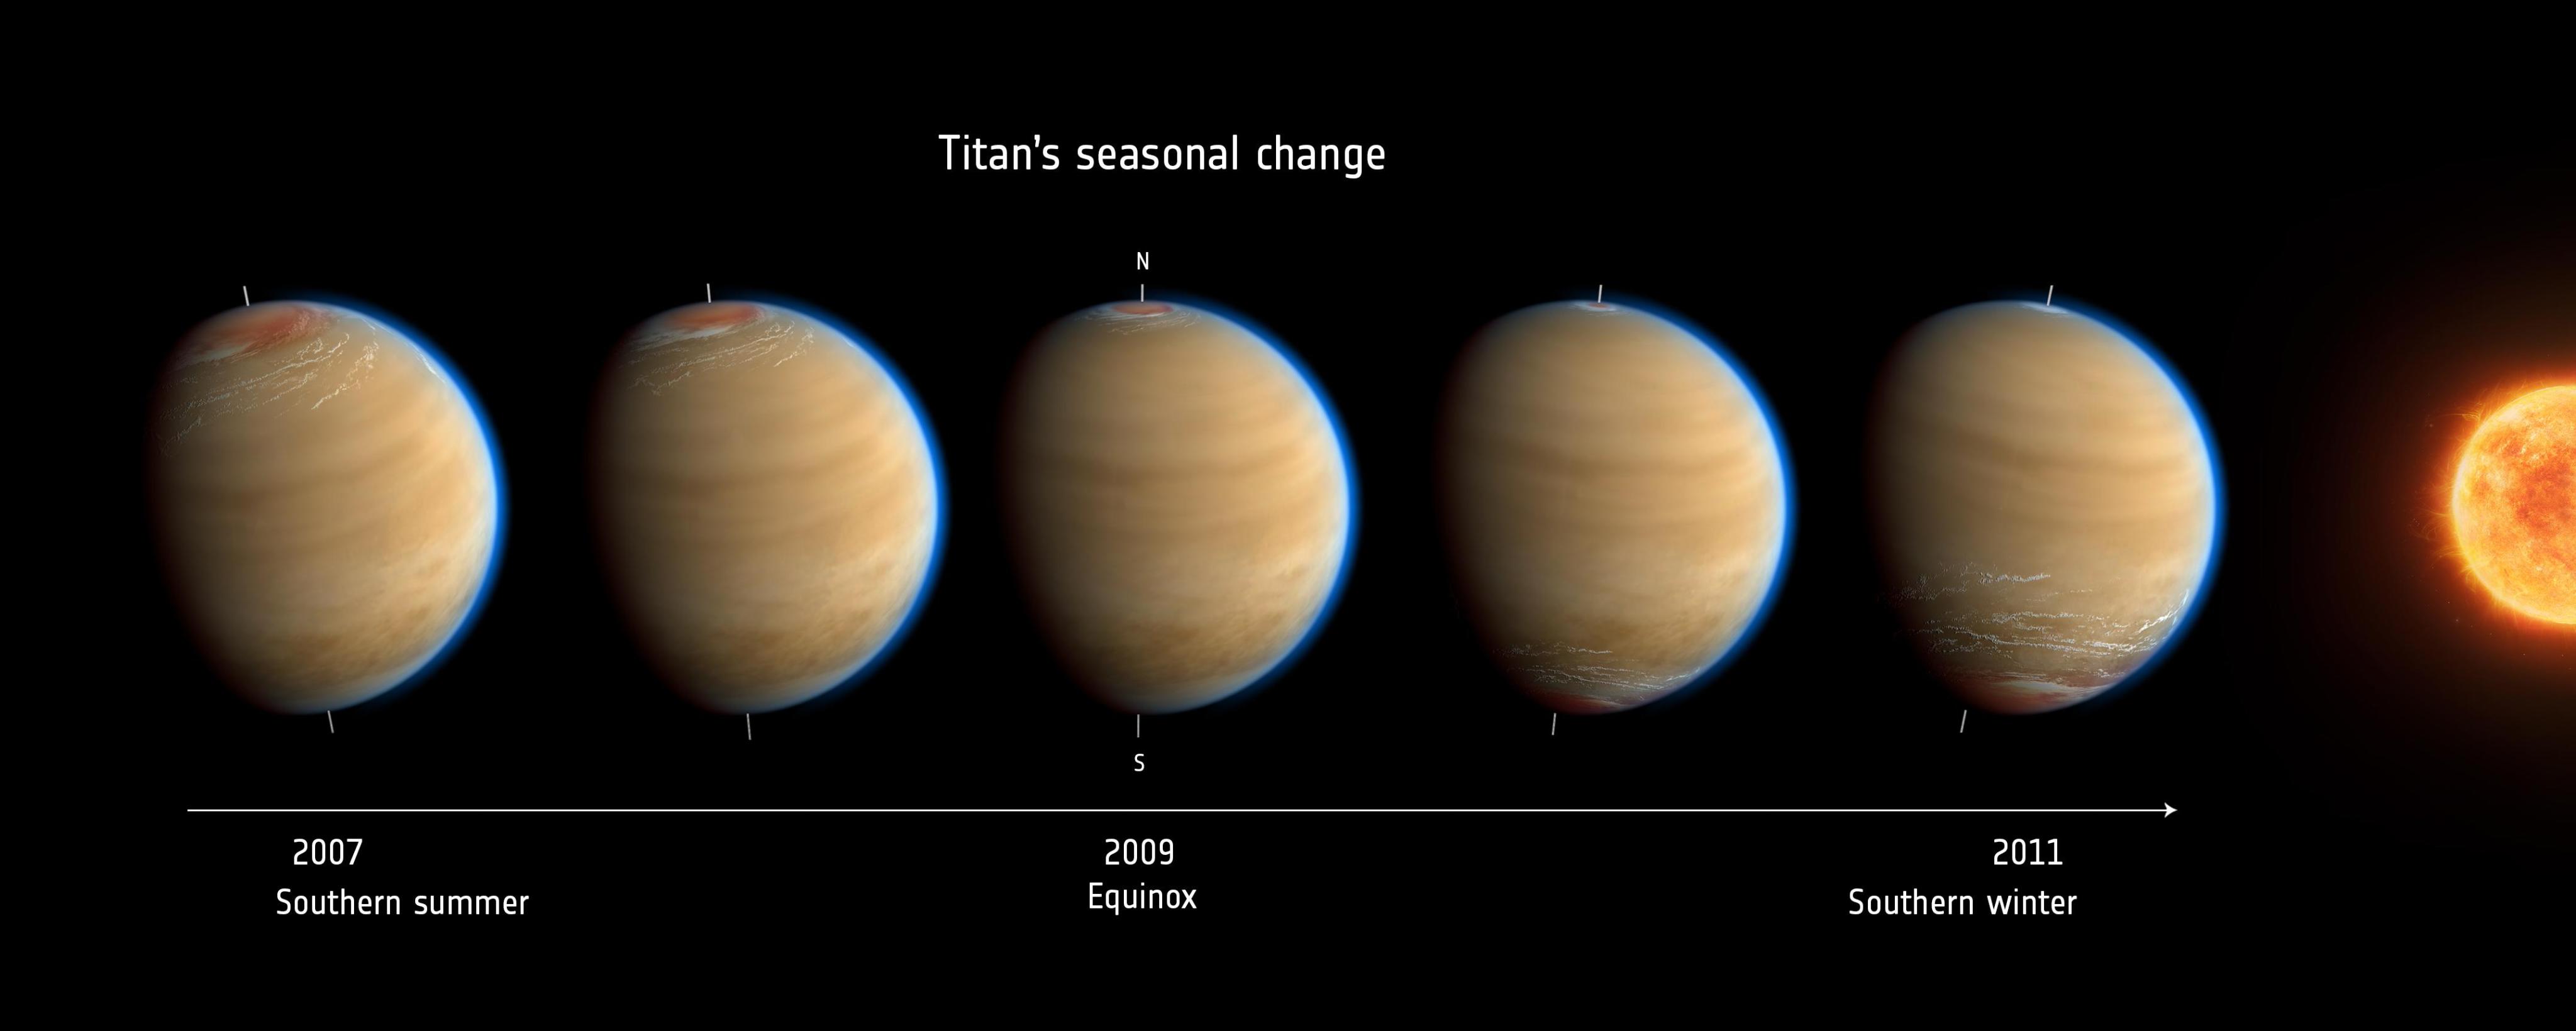 Artist's impression of Titan showing changes during and after equinox in 2009